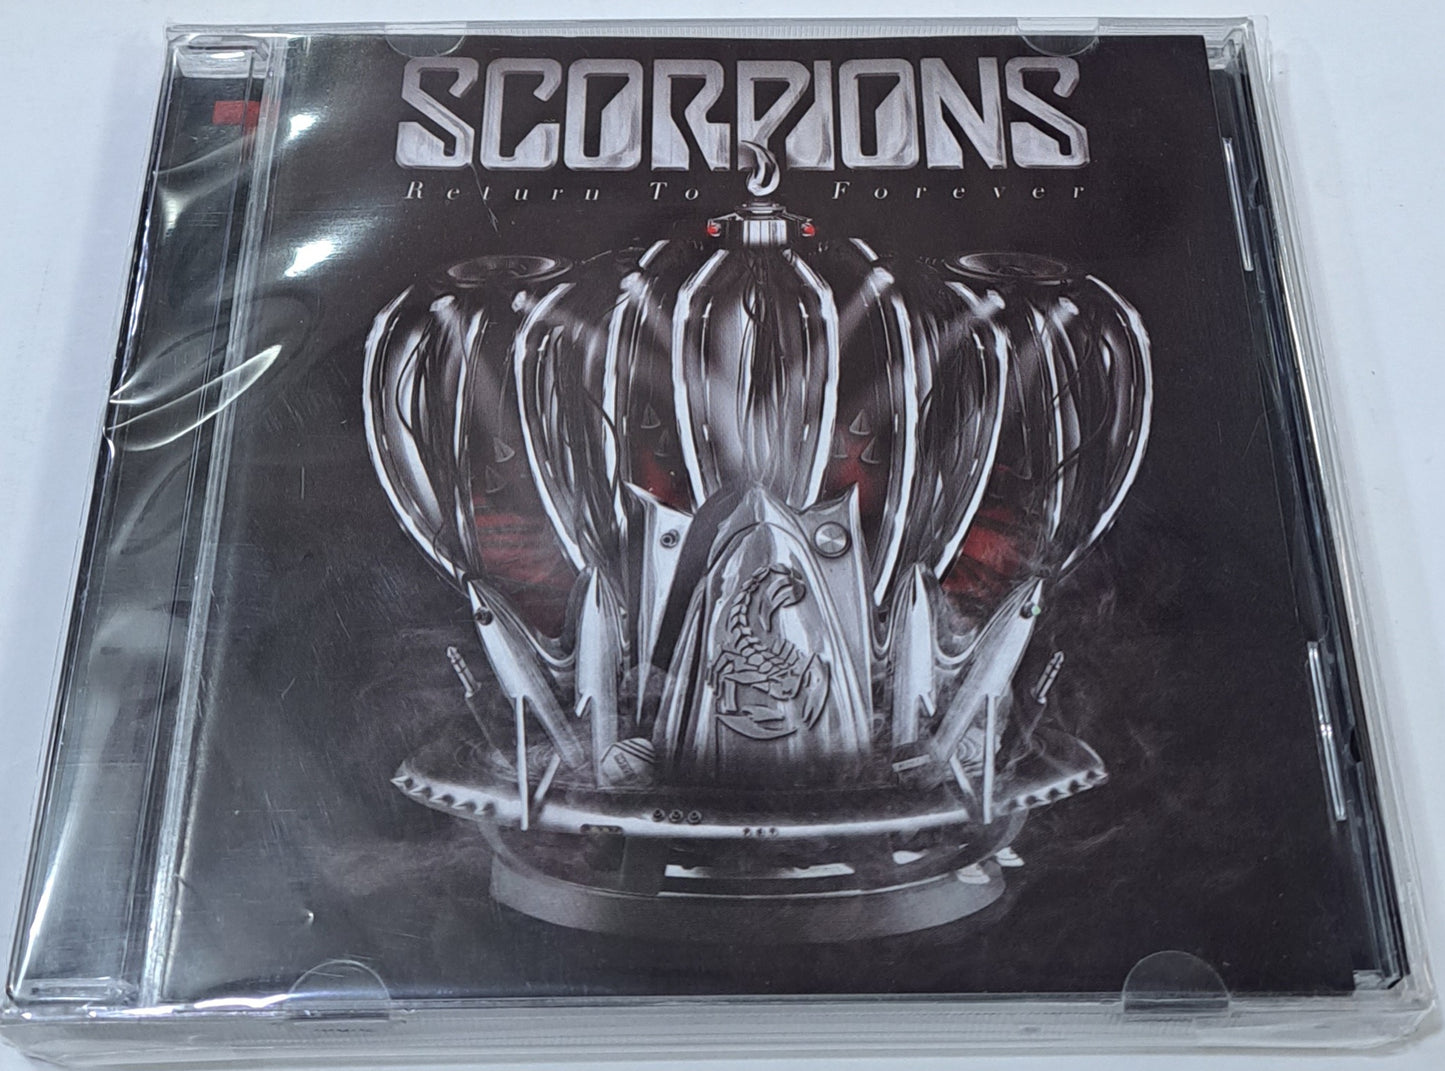 SCORPIONS - RETURN TO FOREVER CD